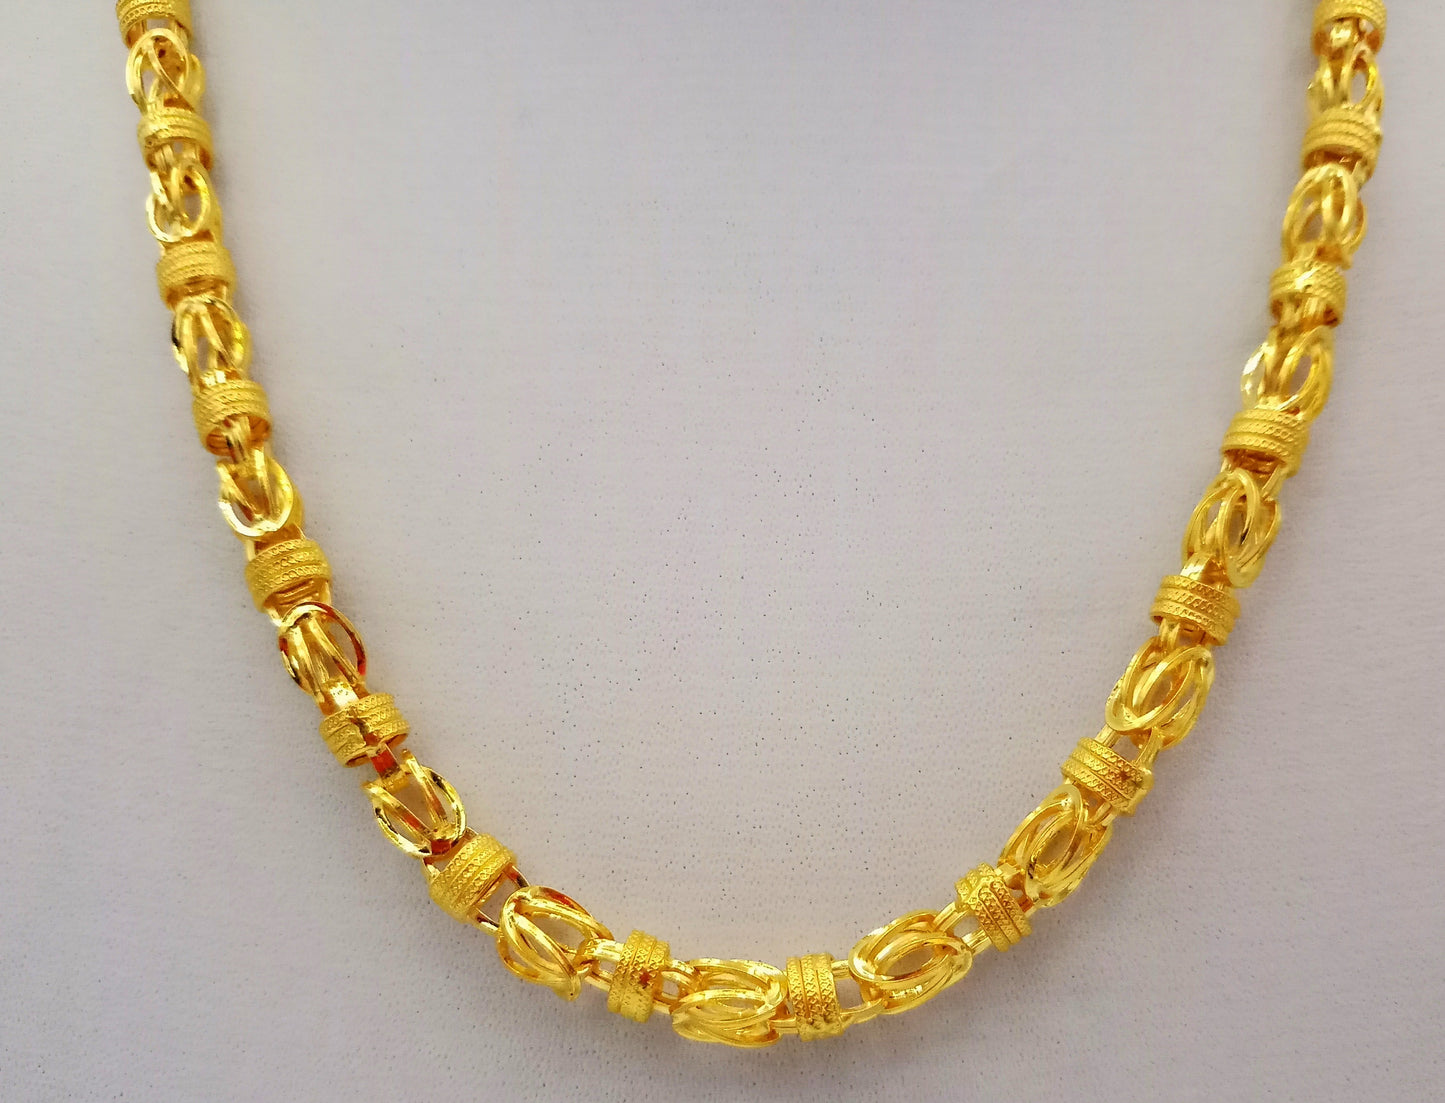 24" inches long 22k yellow gold handmade hollow byzantine necklace chain fabulous indian traditional jewelry - TRIBAL ORNAMENTS